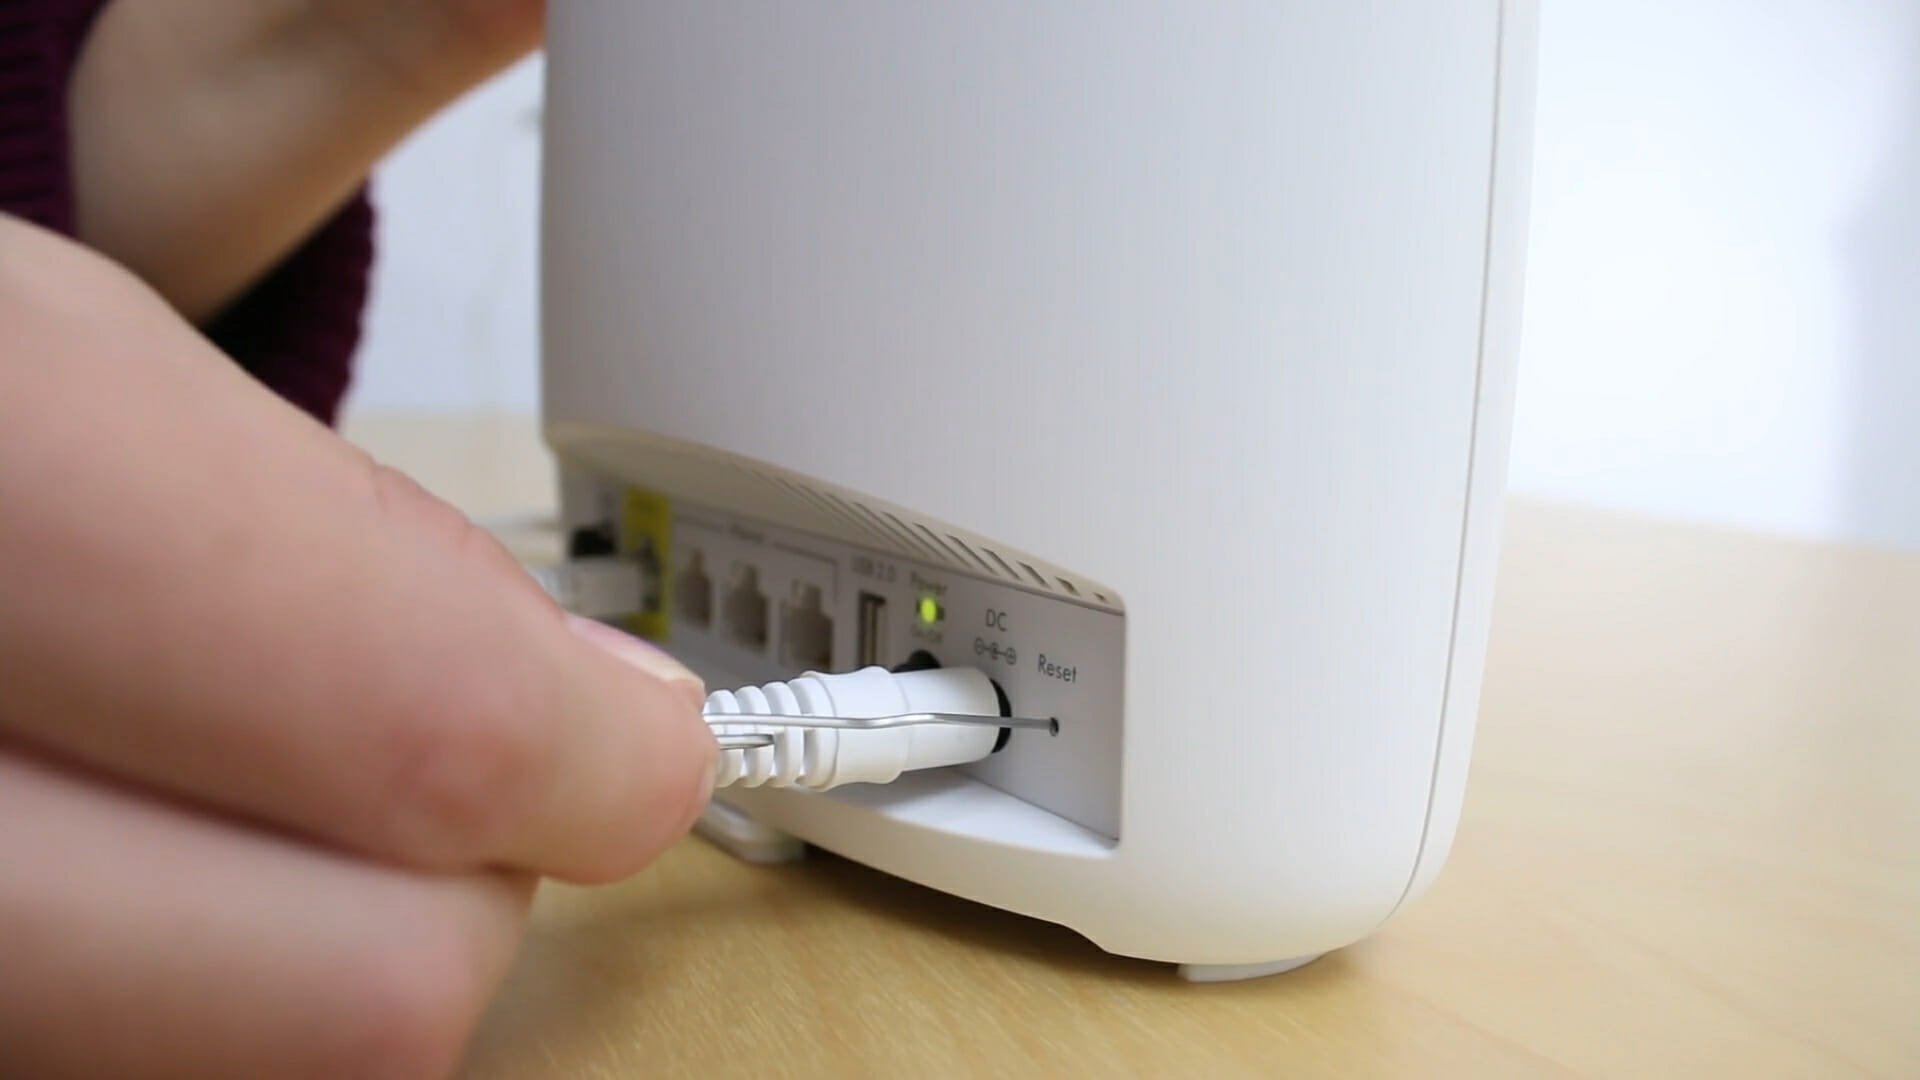 An Orbi router orbi connection issues